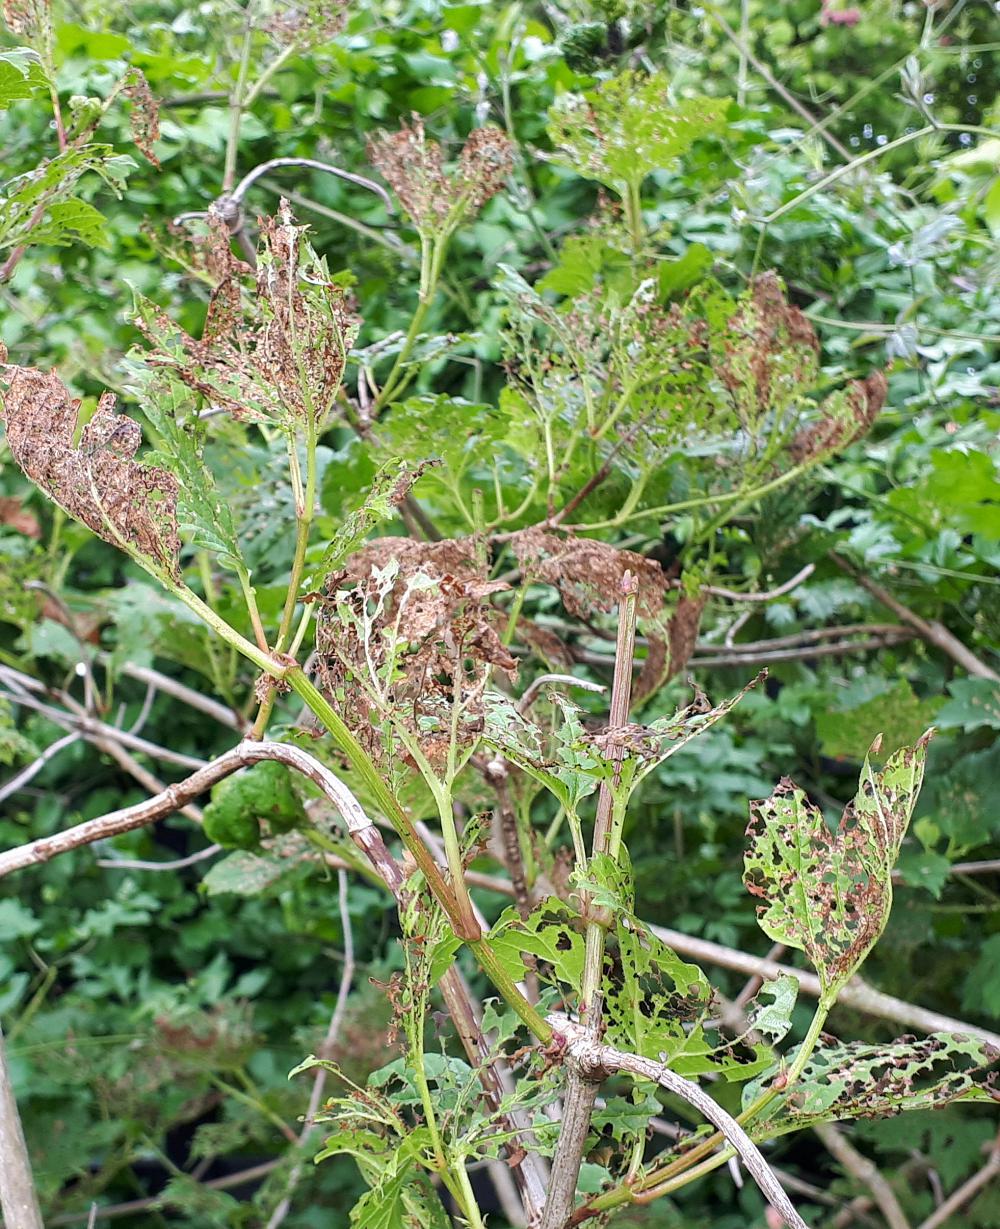 Look out for damage from viburnum beetles